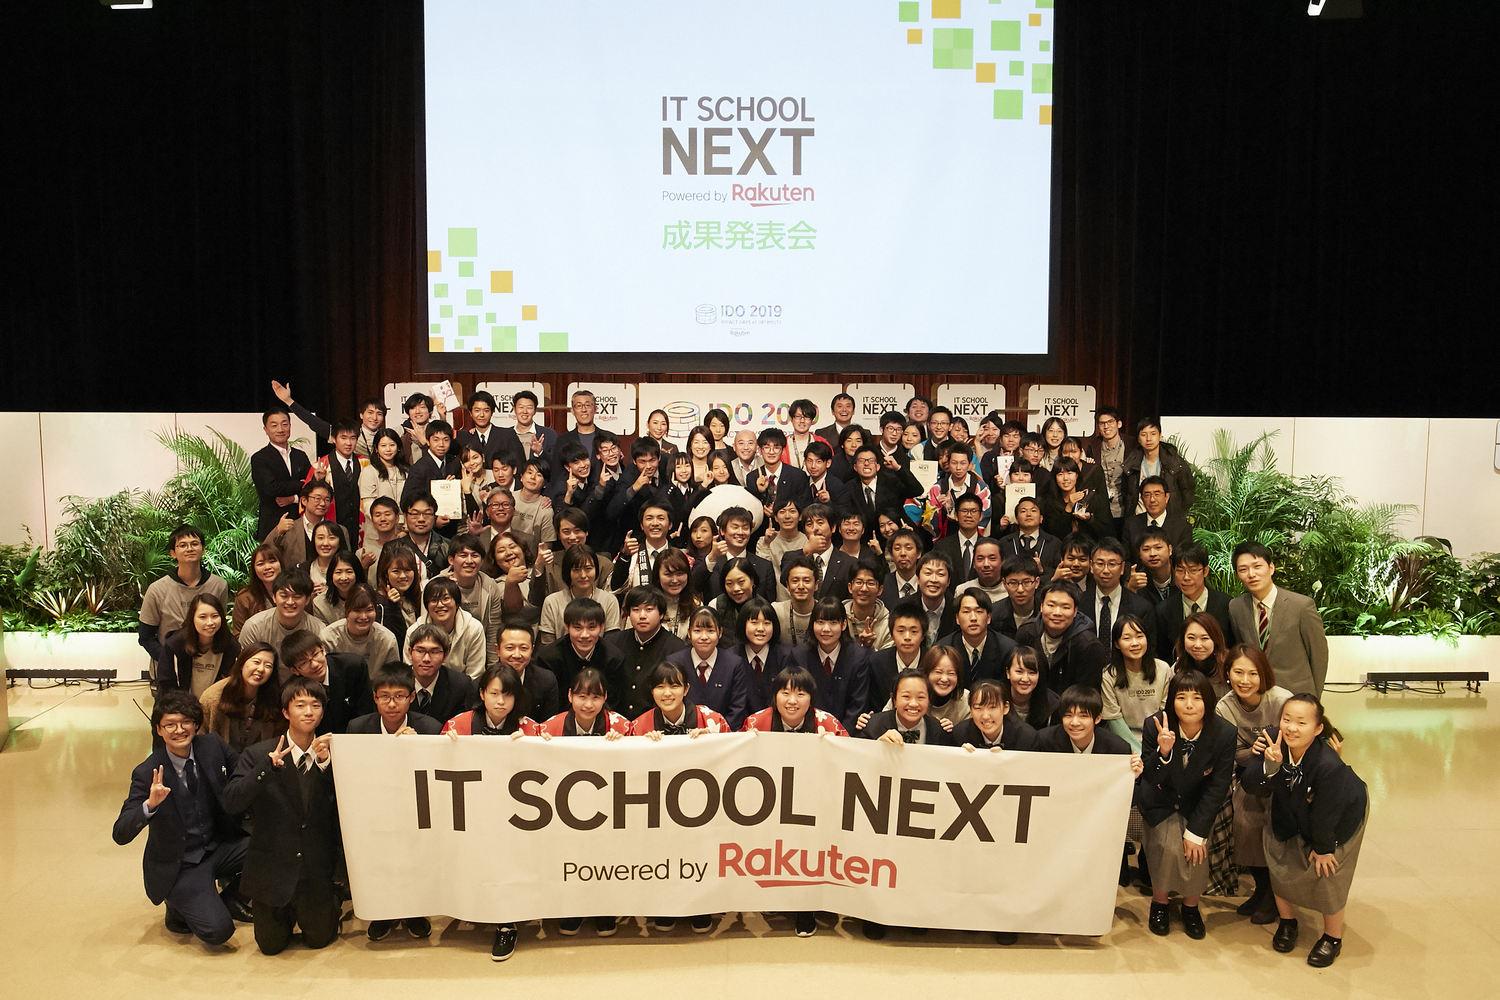 Rakuten IT School NEXT: Hope for the coming generations. These high schoolers are working to transform their communities.